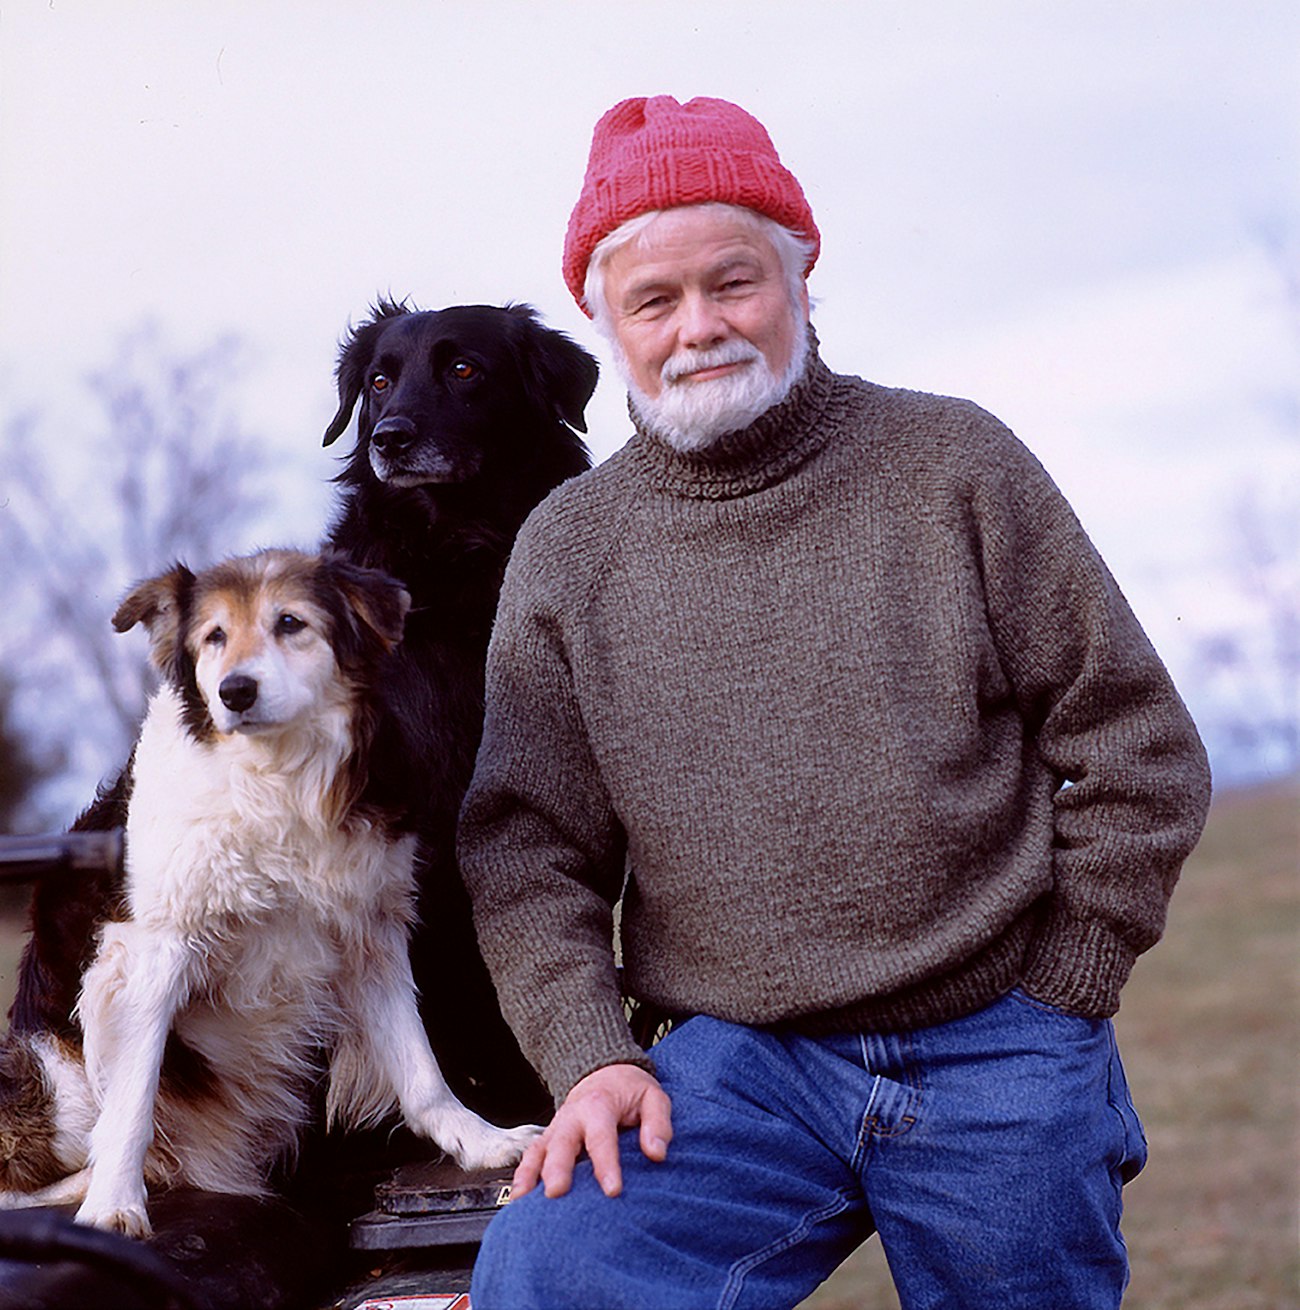 Man with white beads and red hat with 2 dogs